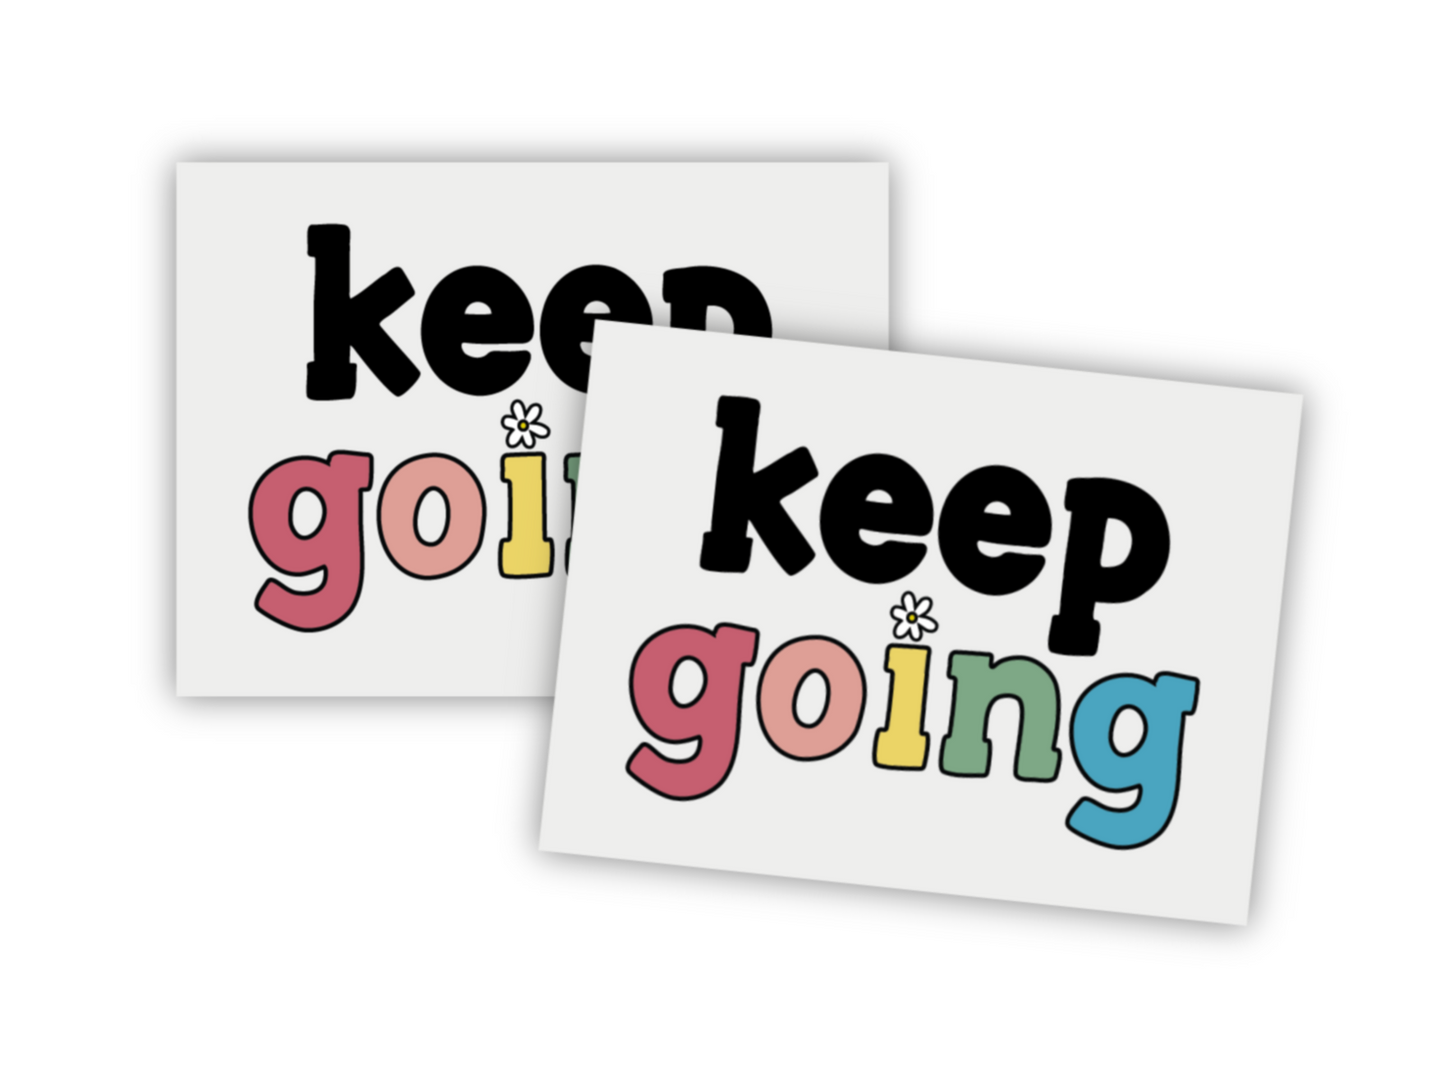 Keep Going Temporary Tattoos (Set of 2)